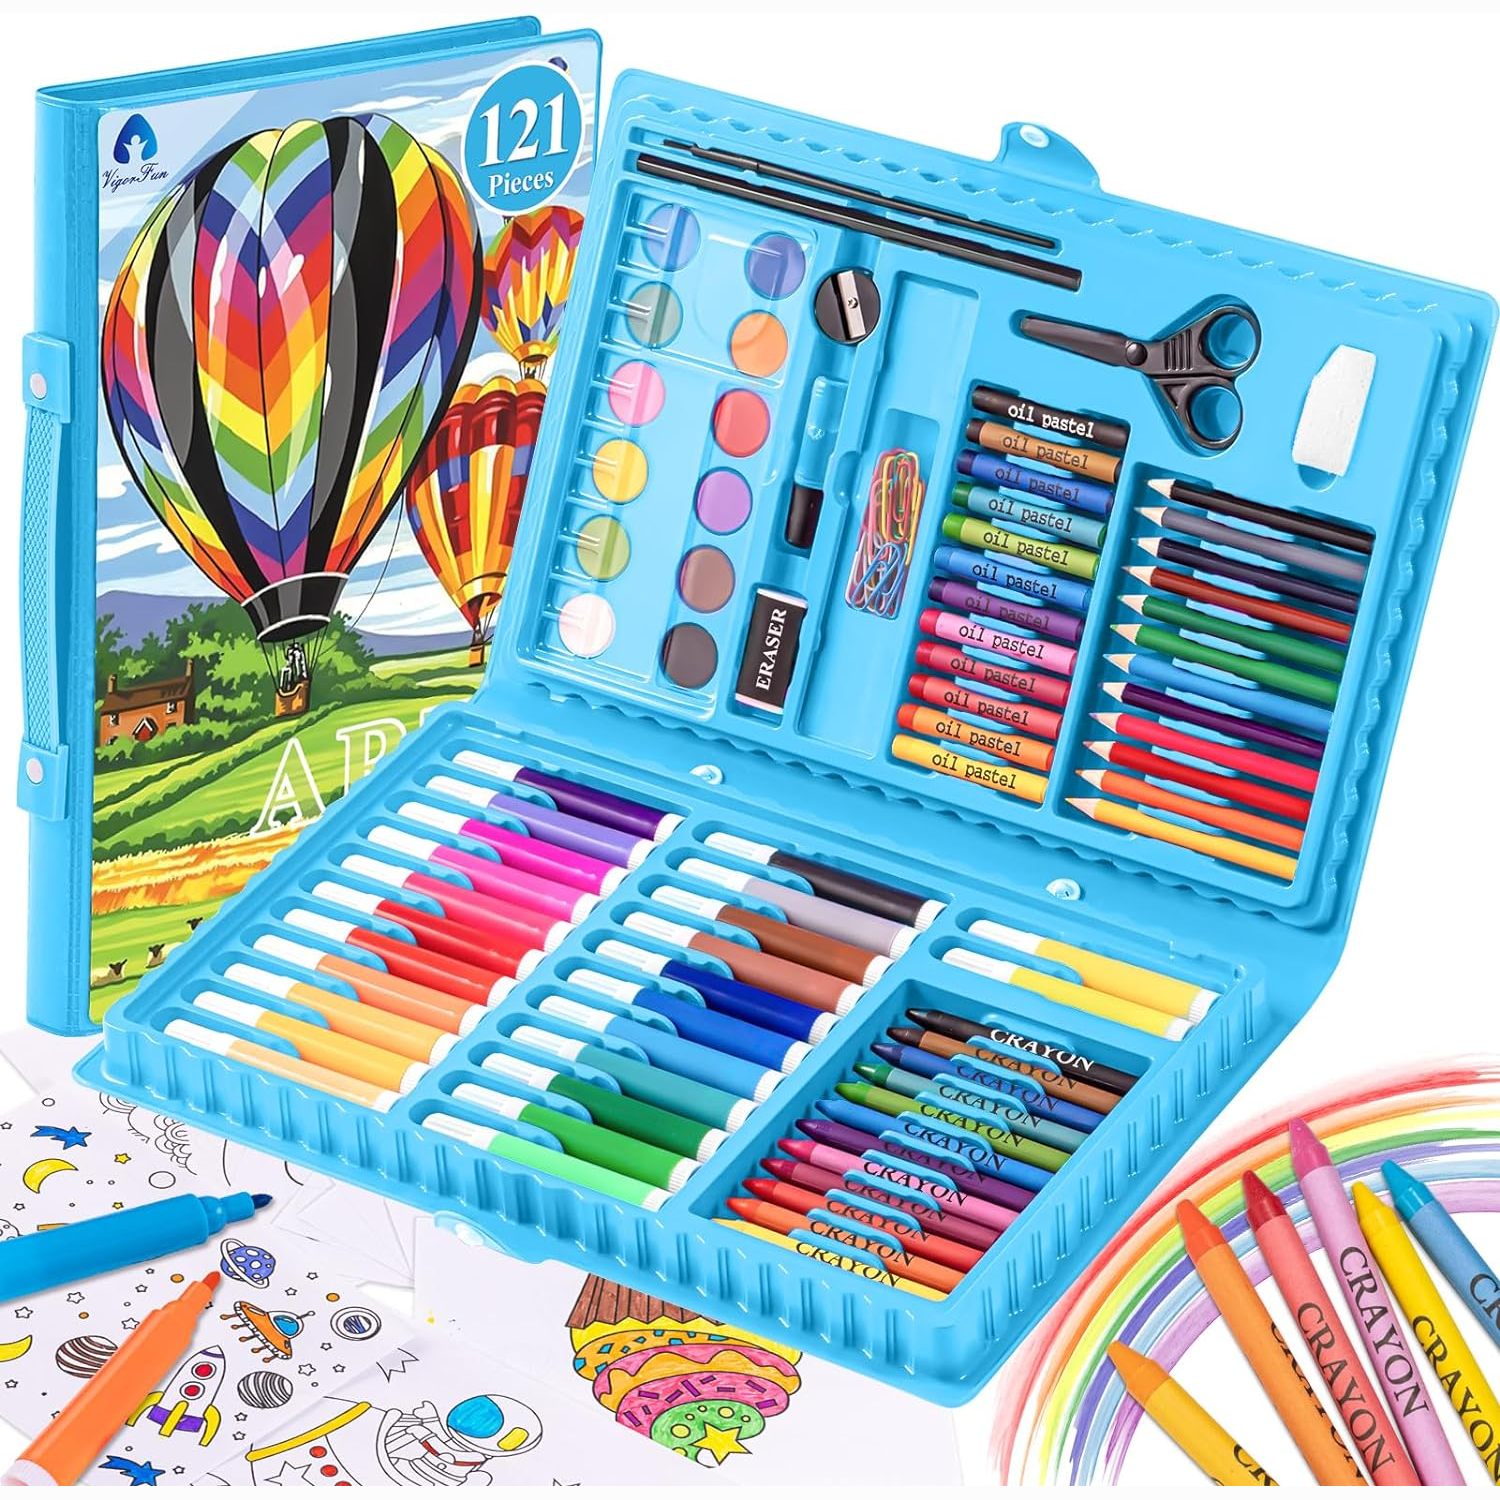 GirlZone Ultimate Art Set For Girls ages 5-8, 118 Piece Kids Coloring Set  with Pens, Pencils, Paints, Crayons and More! Great Ki